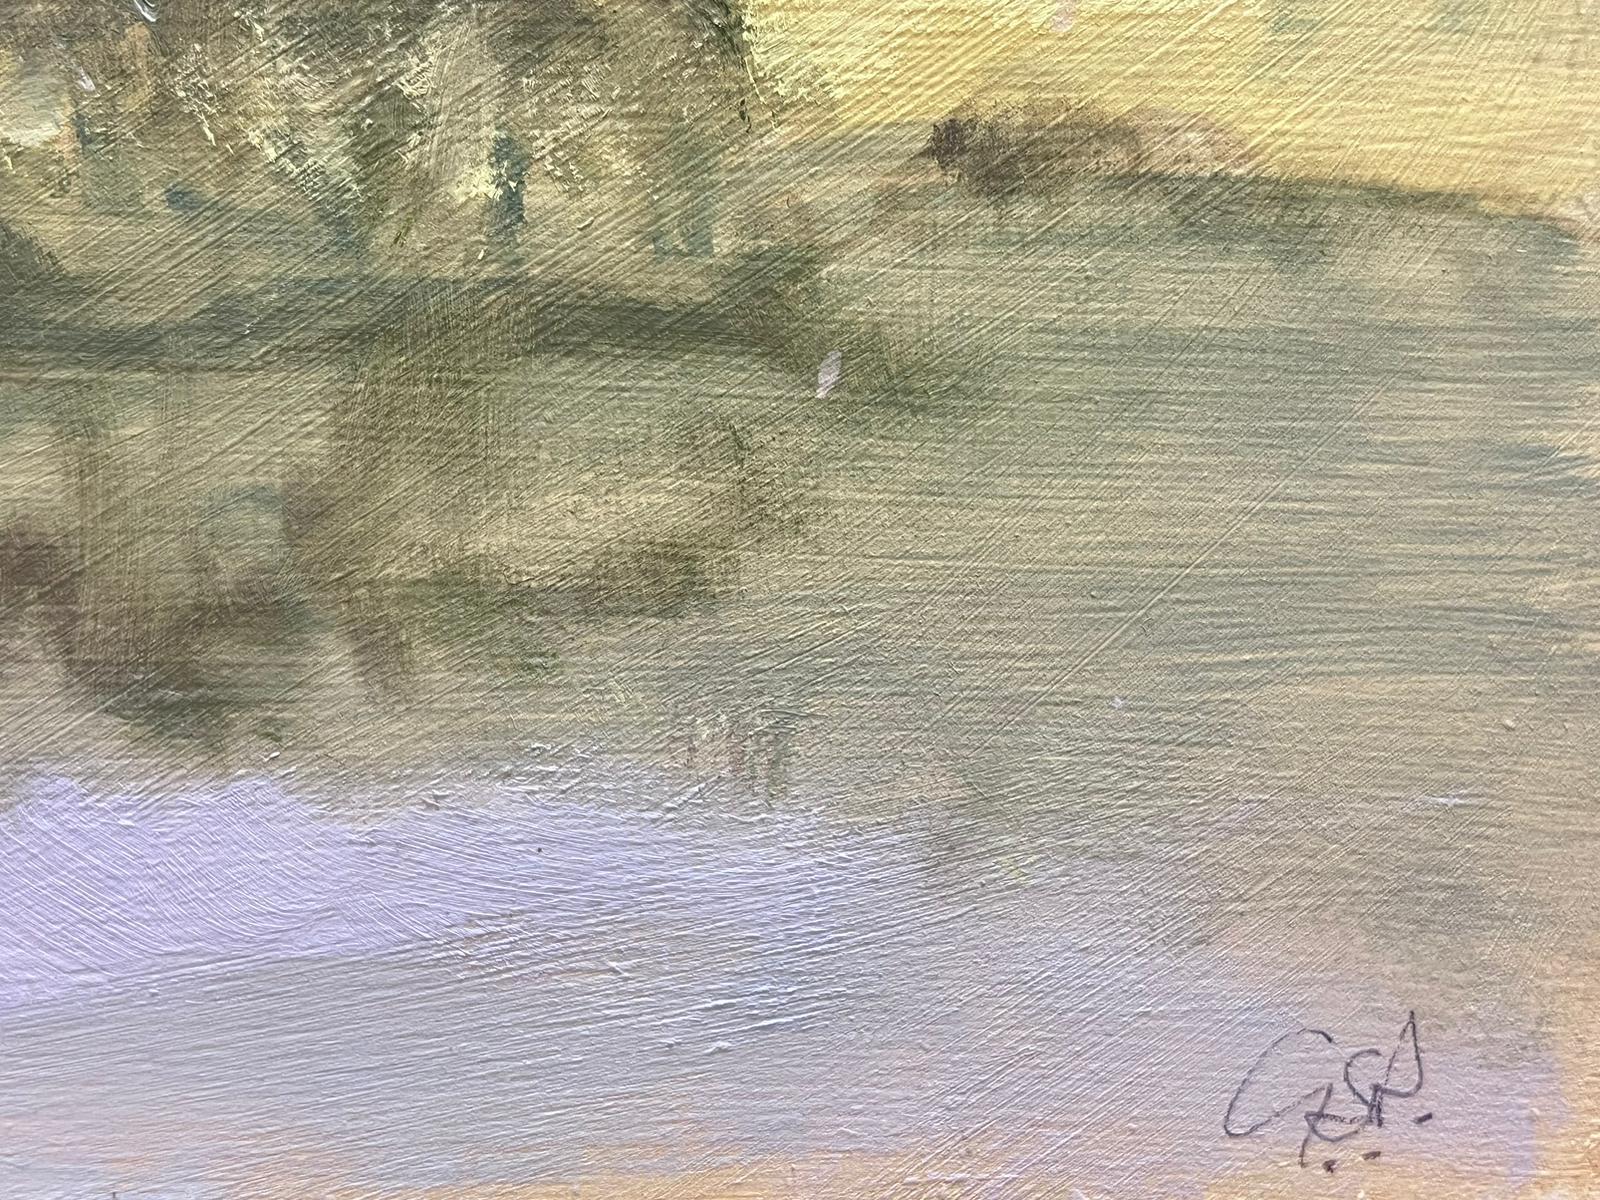 Landscape
signed by Geza Somerset-Paddon (British 20th century)
oil painting on board, unframed
size: 7.25 x 10 inches
condition: overall very good
inscribed verso
provenance: all the paintings we have by this artist have come from their studio sale